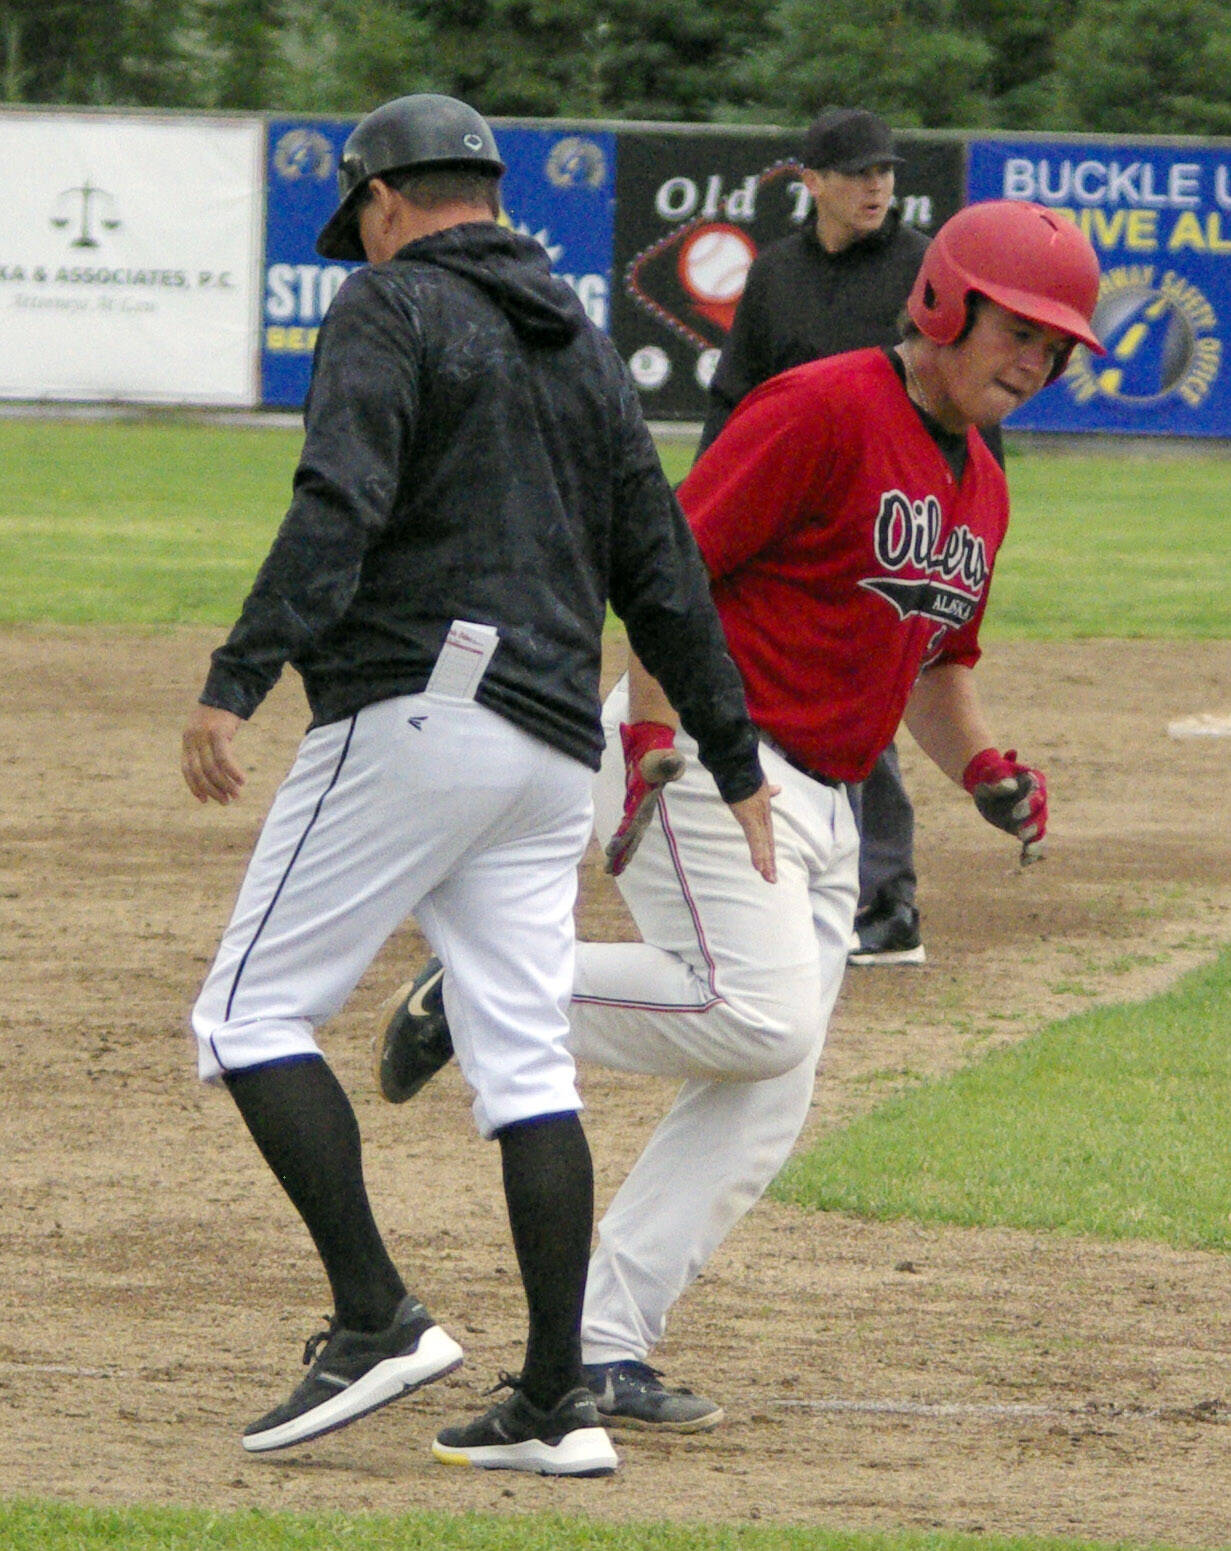 Jacob Shaver of the Oilers rounds third base after hitting a two-run home run in the sixth inning against the Chugiak-Eagle River Chinooks on Sunday, July 10, 2022, at Coral Seymour Memorial Park in Kenai, Alaska. (Photo by Jeff Helminiak/Peninsula Clarion)